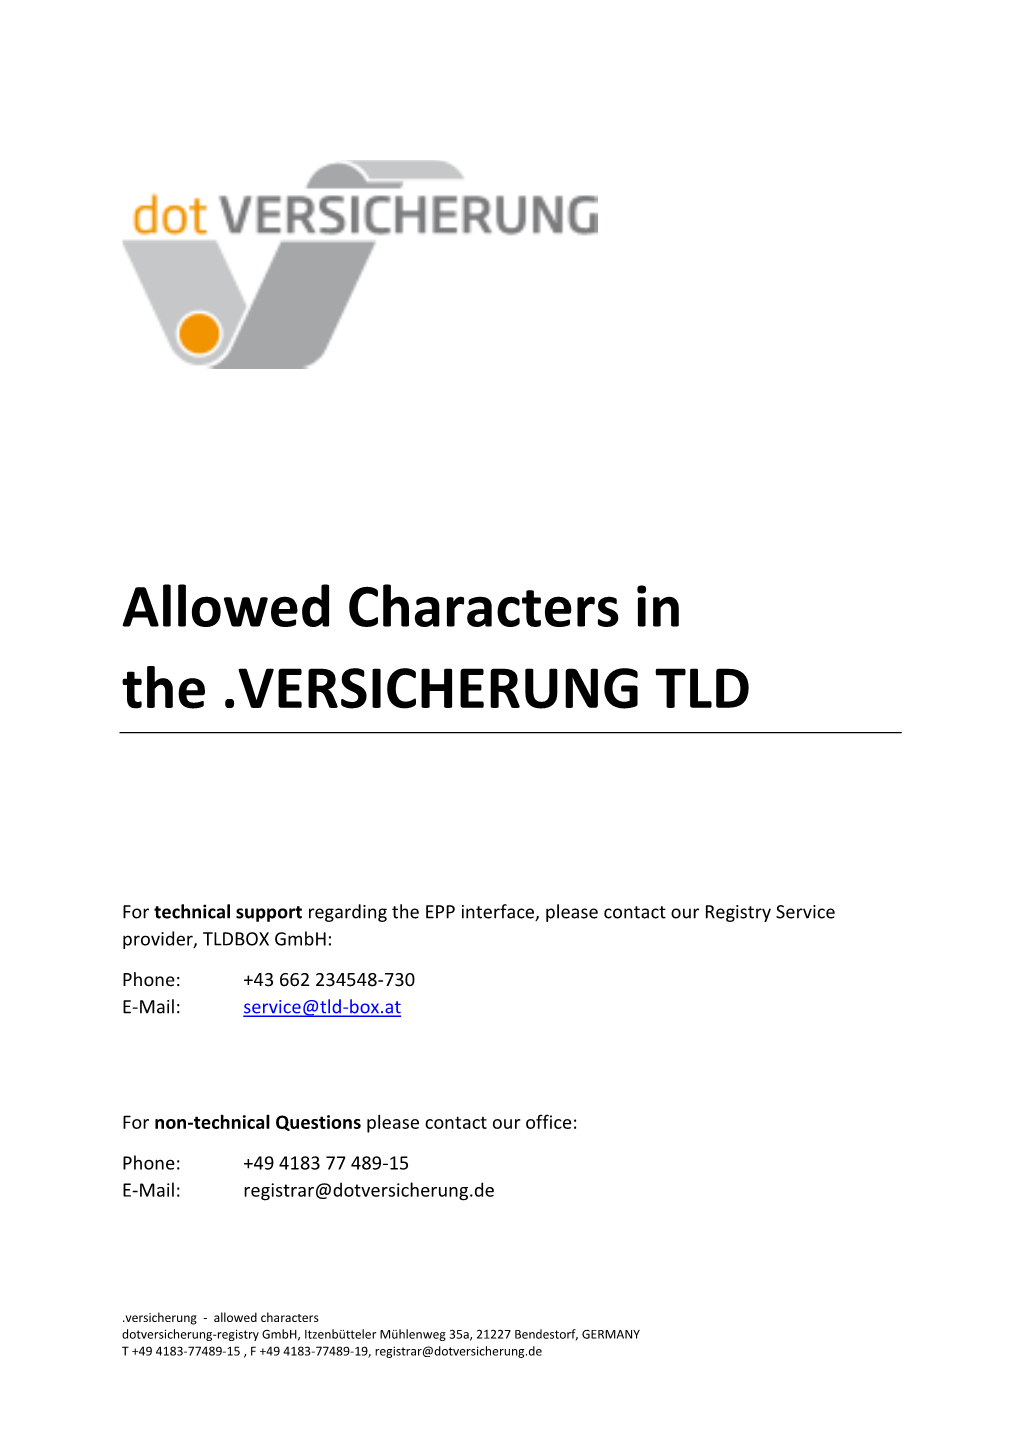 Allowed Characters in the .VERSICHERUNG TLD